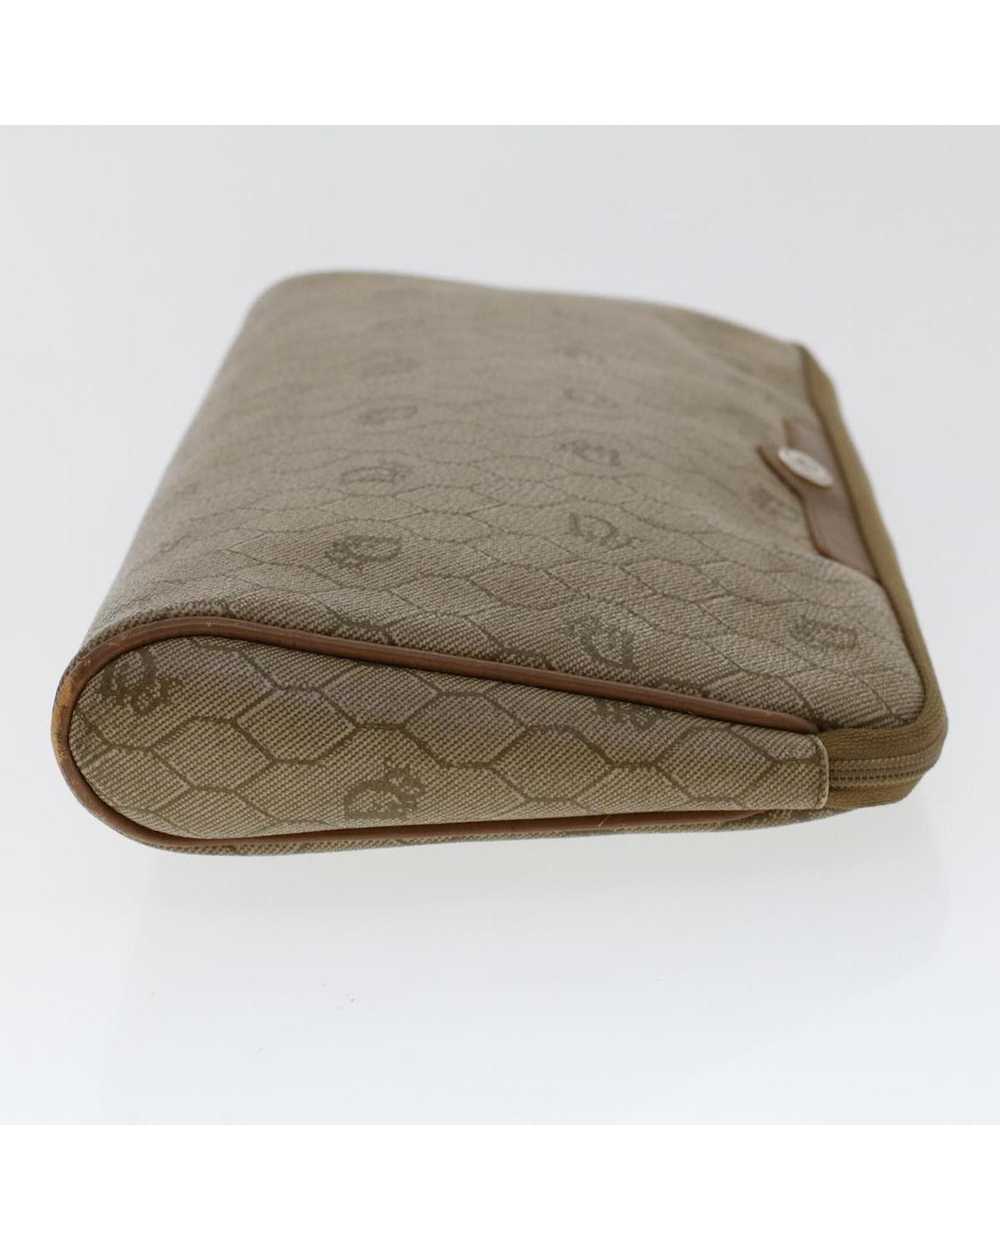 Dior Honeycomb Canvas Clutch by Dior - image 3